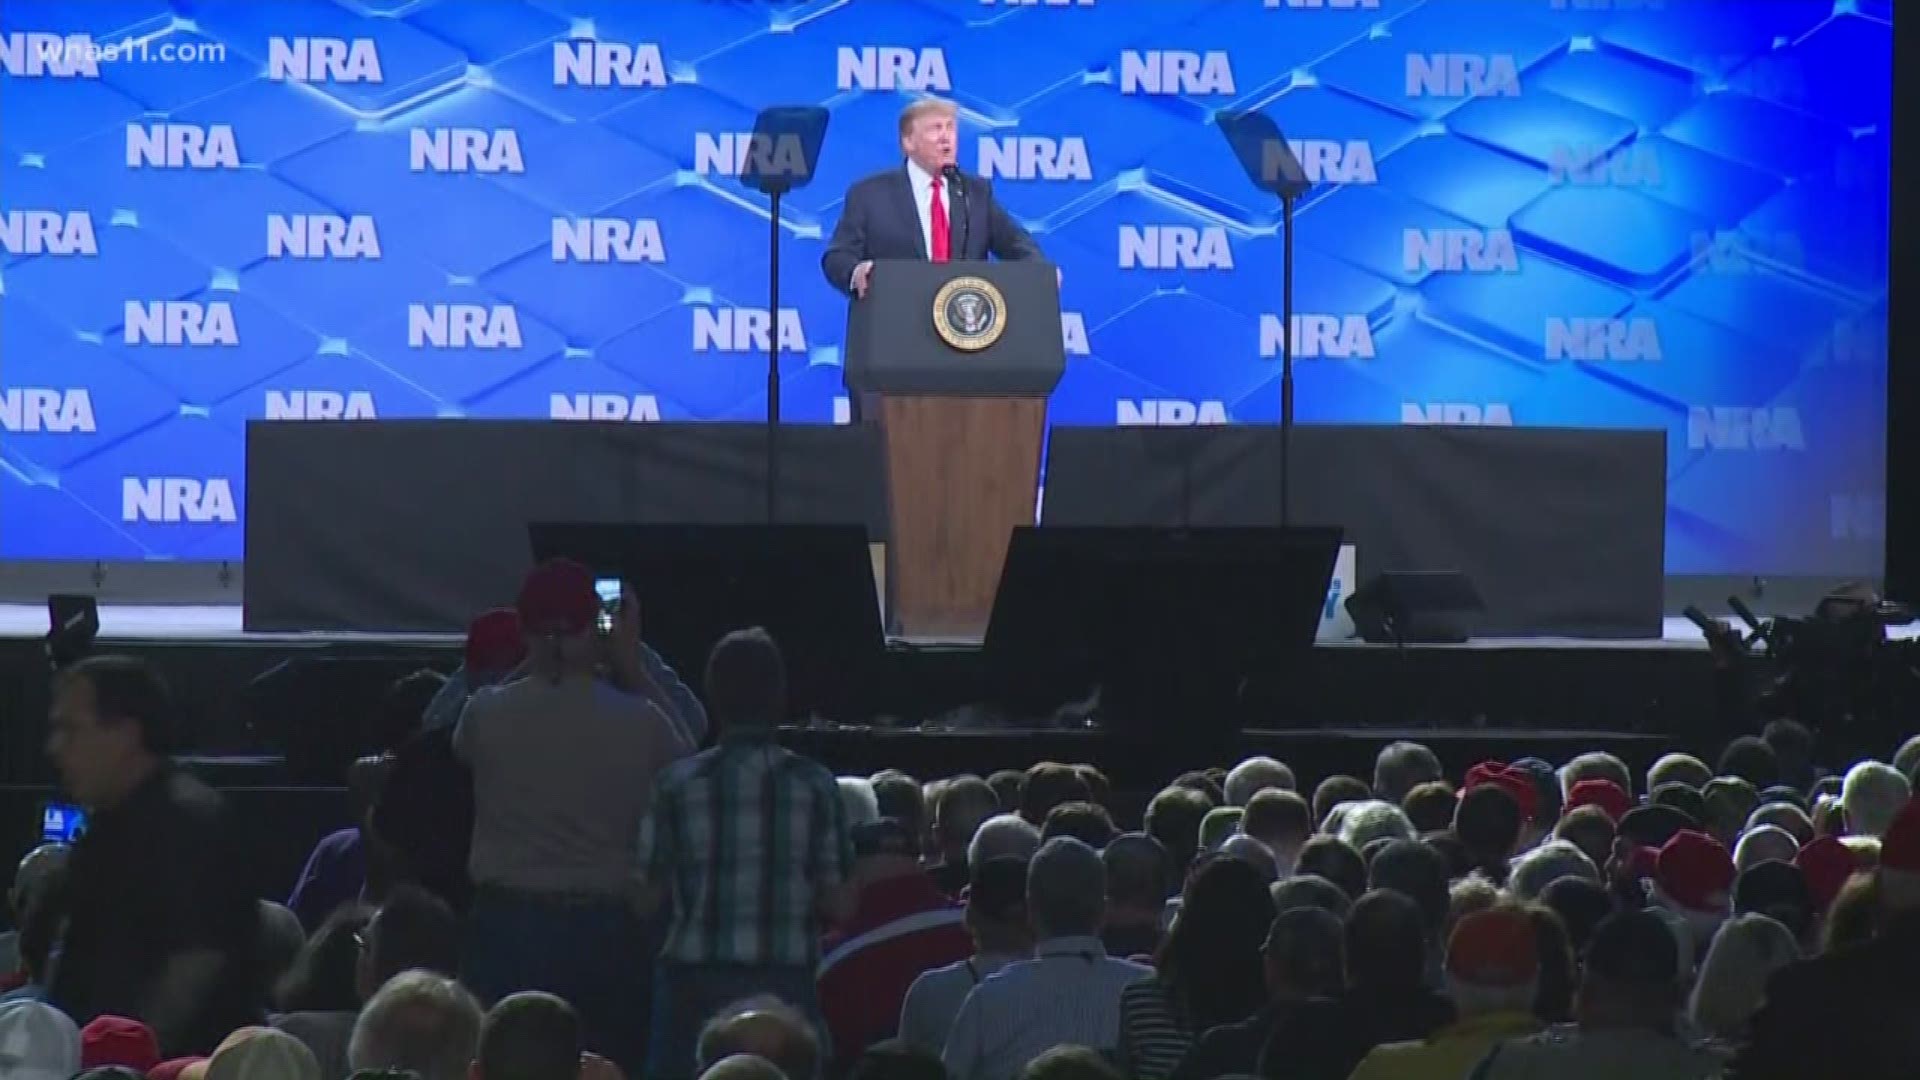 President Donald Trump claimed there was an assault on freedoms and the second amendment at the conference in Indiana.